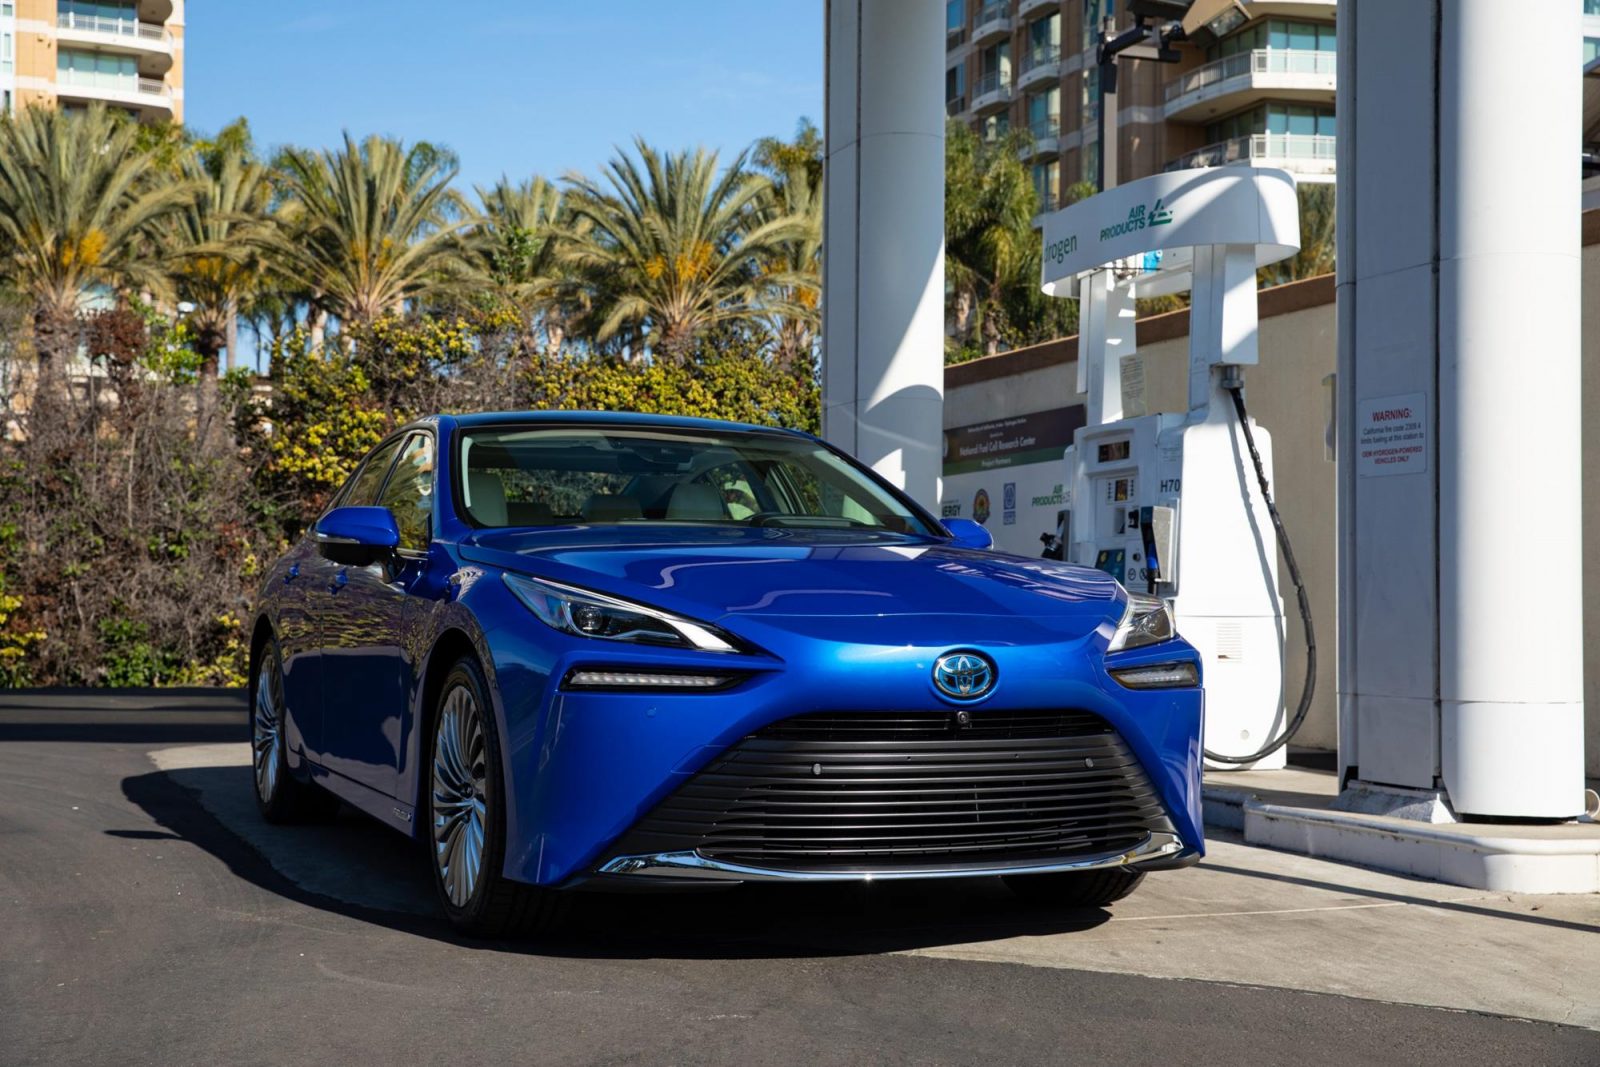 Toyota Introduces SecondGeneration Mirai Fuel Cell Electric Vehicle